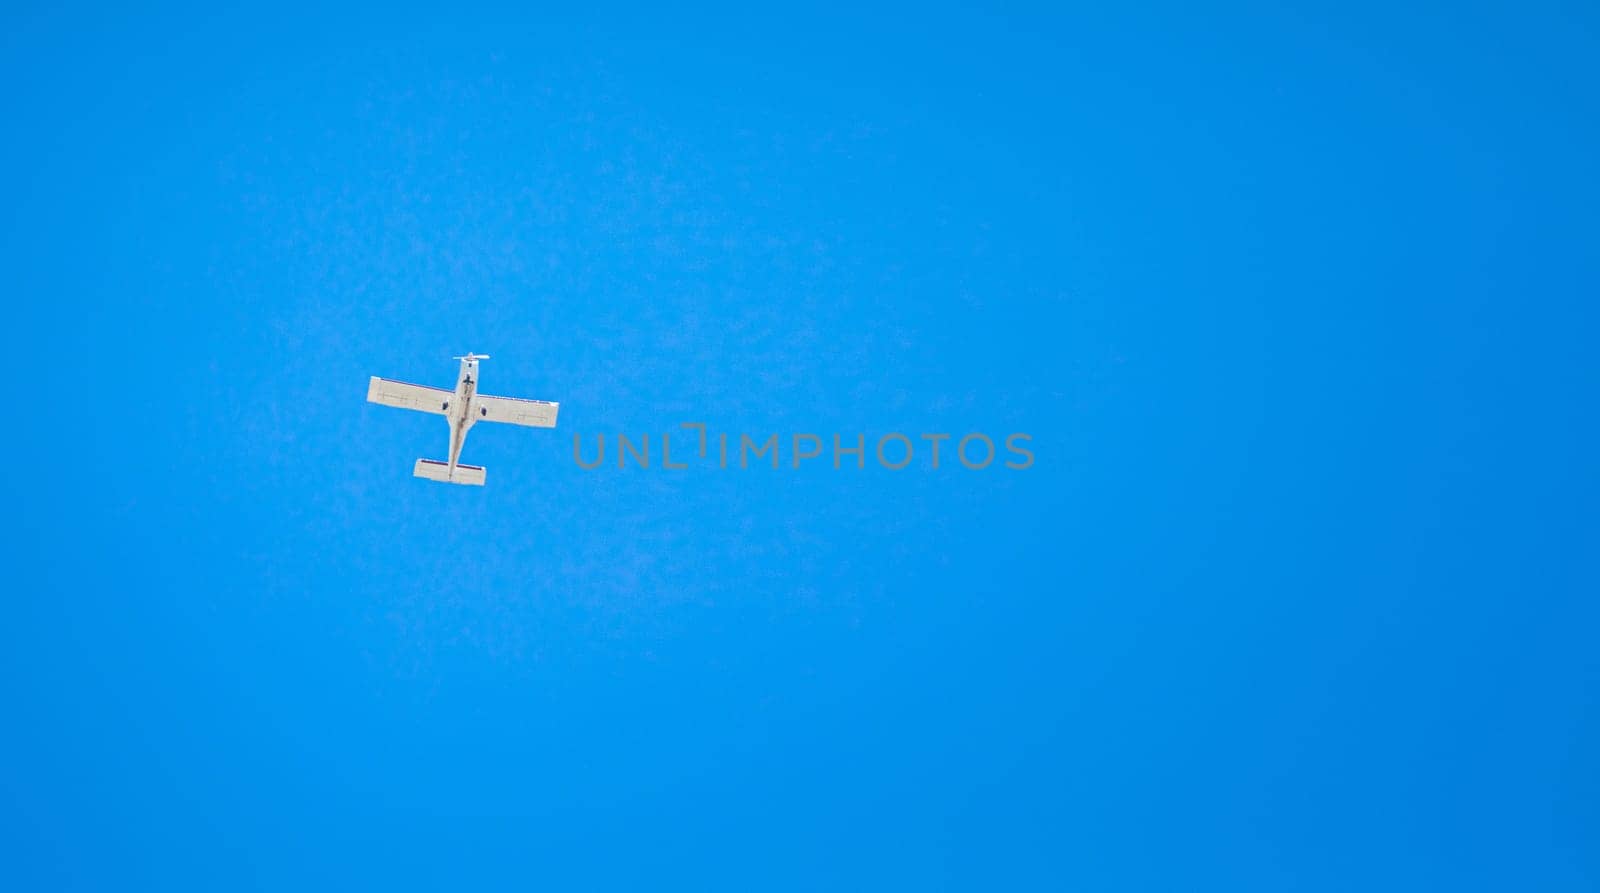 A small light plane flies in the clear sky. View from below. Horizontal orientation